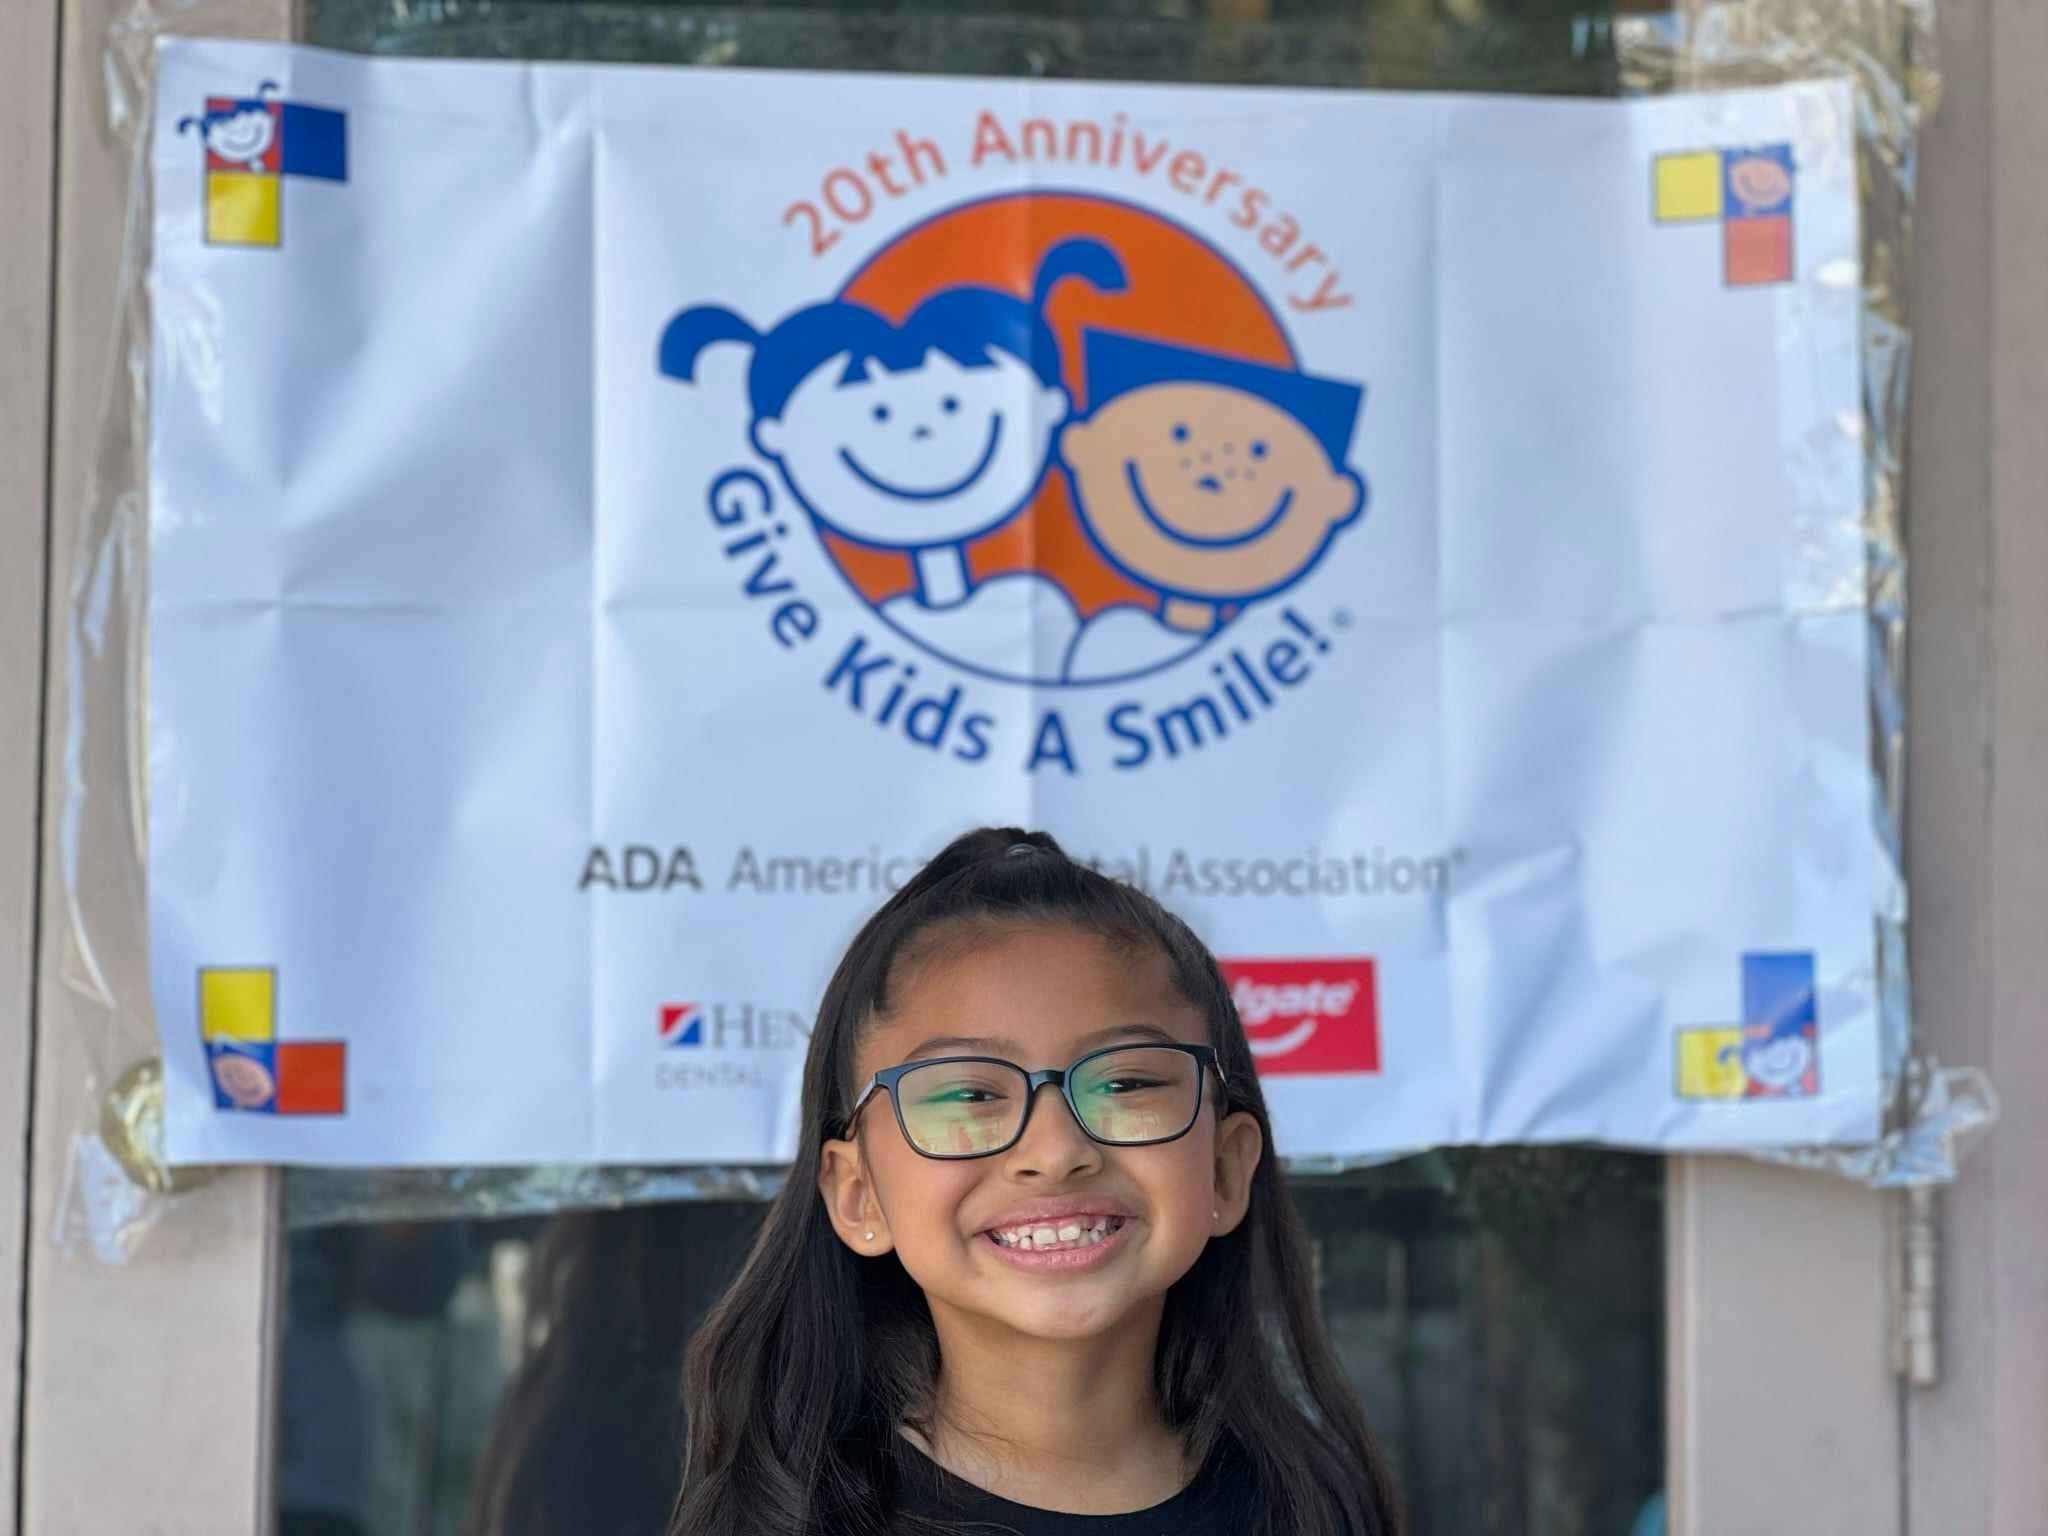 A child smiling in front of a Give Kids a Smile sign